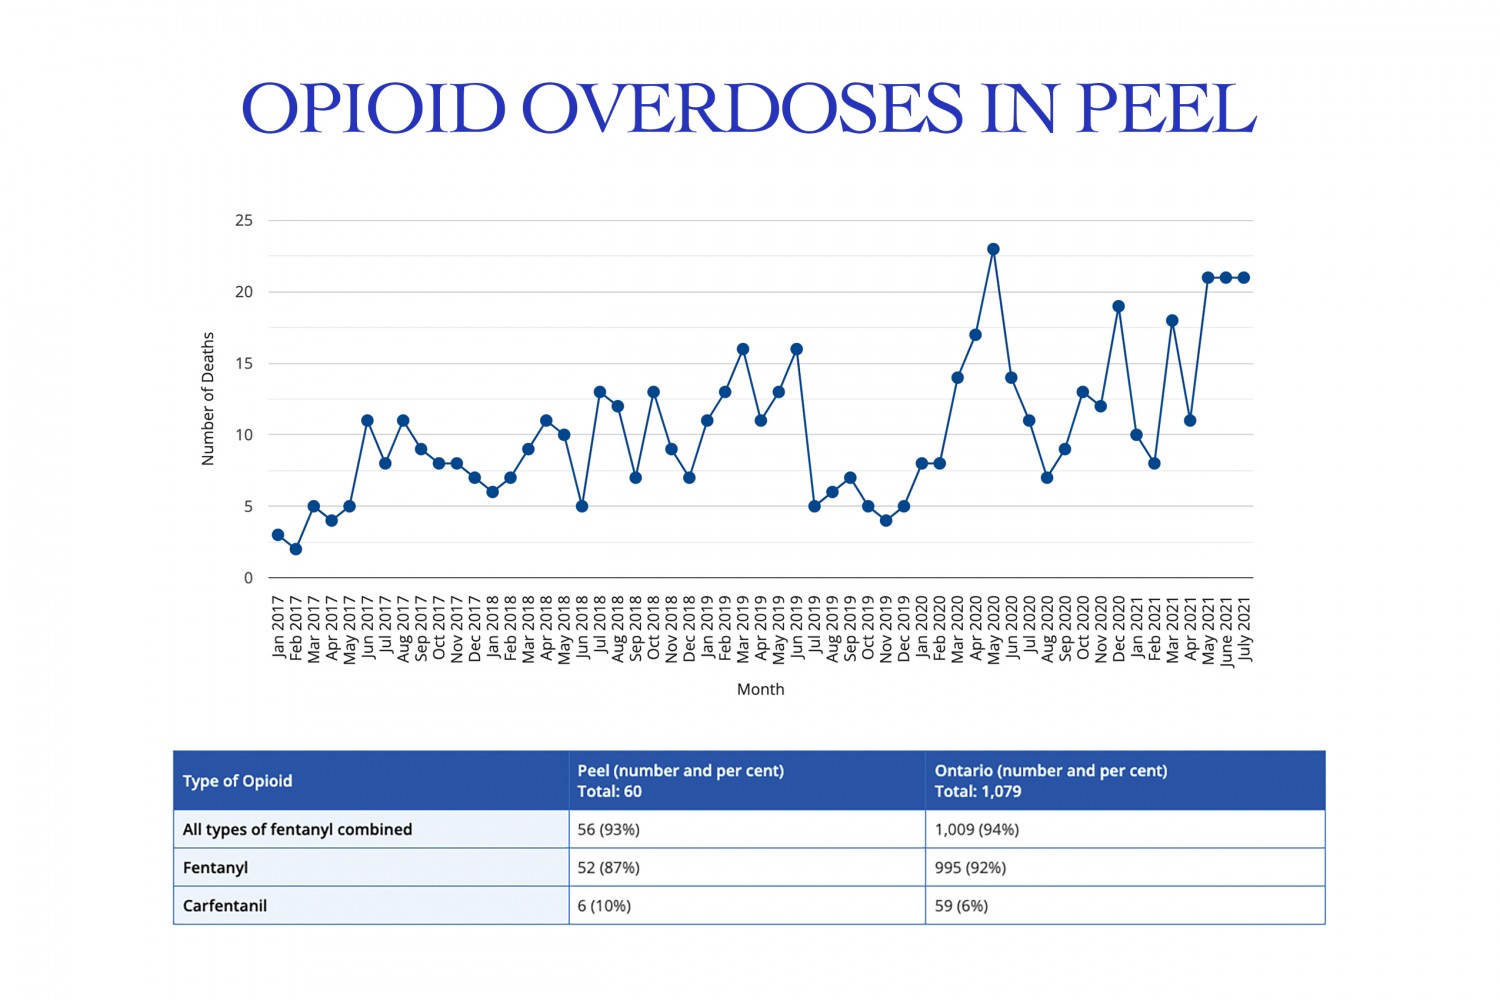 After two deadly years of overdoses, Peel’s opioid strategy set to resume 